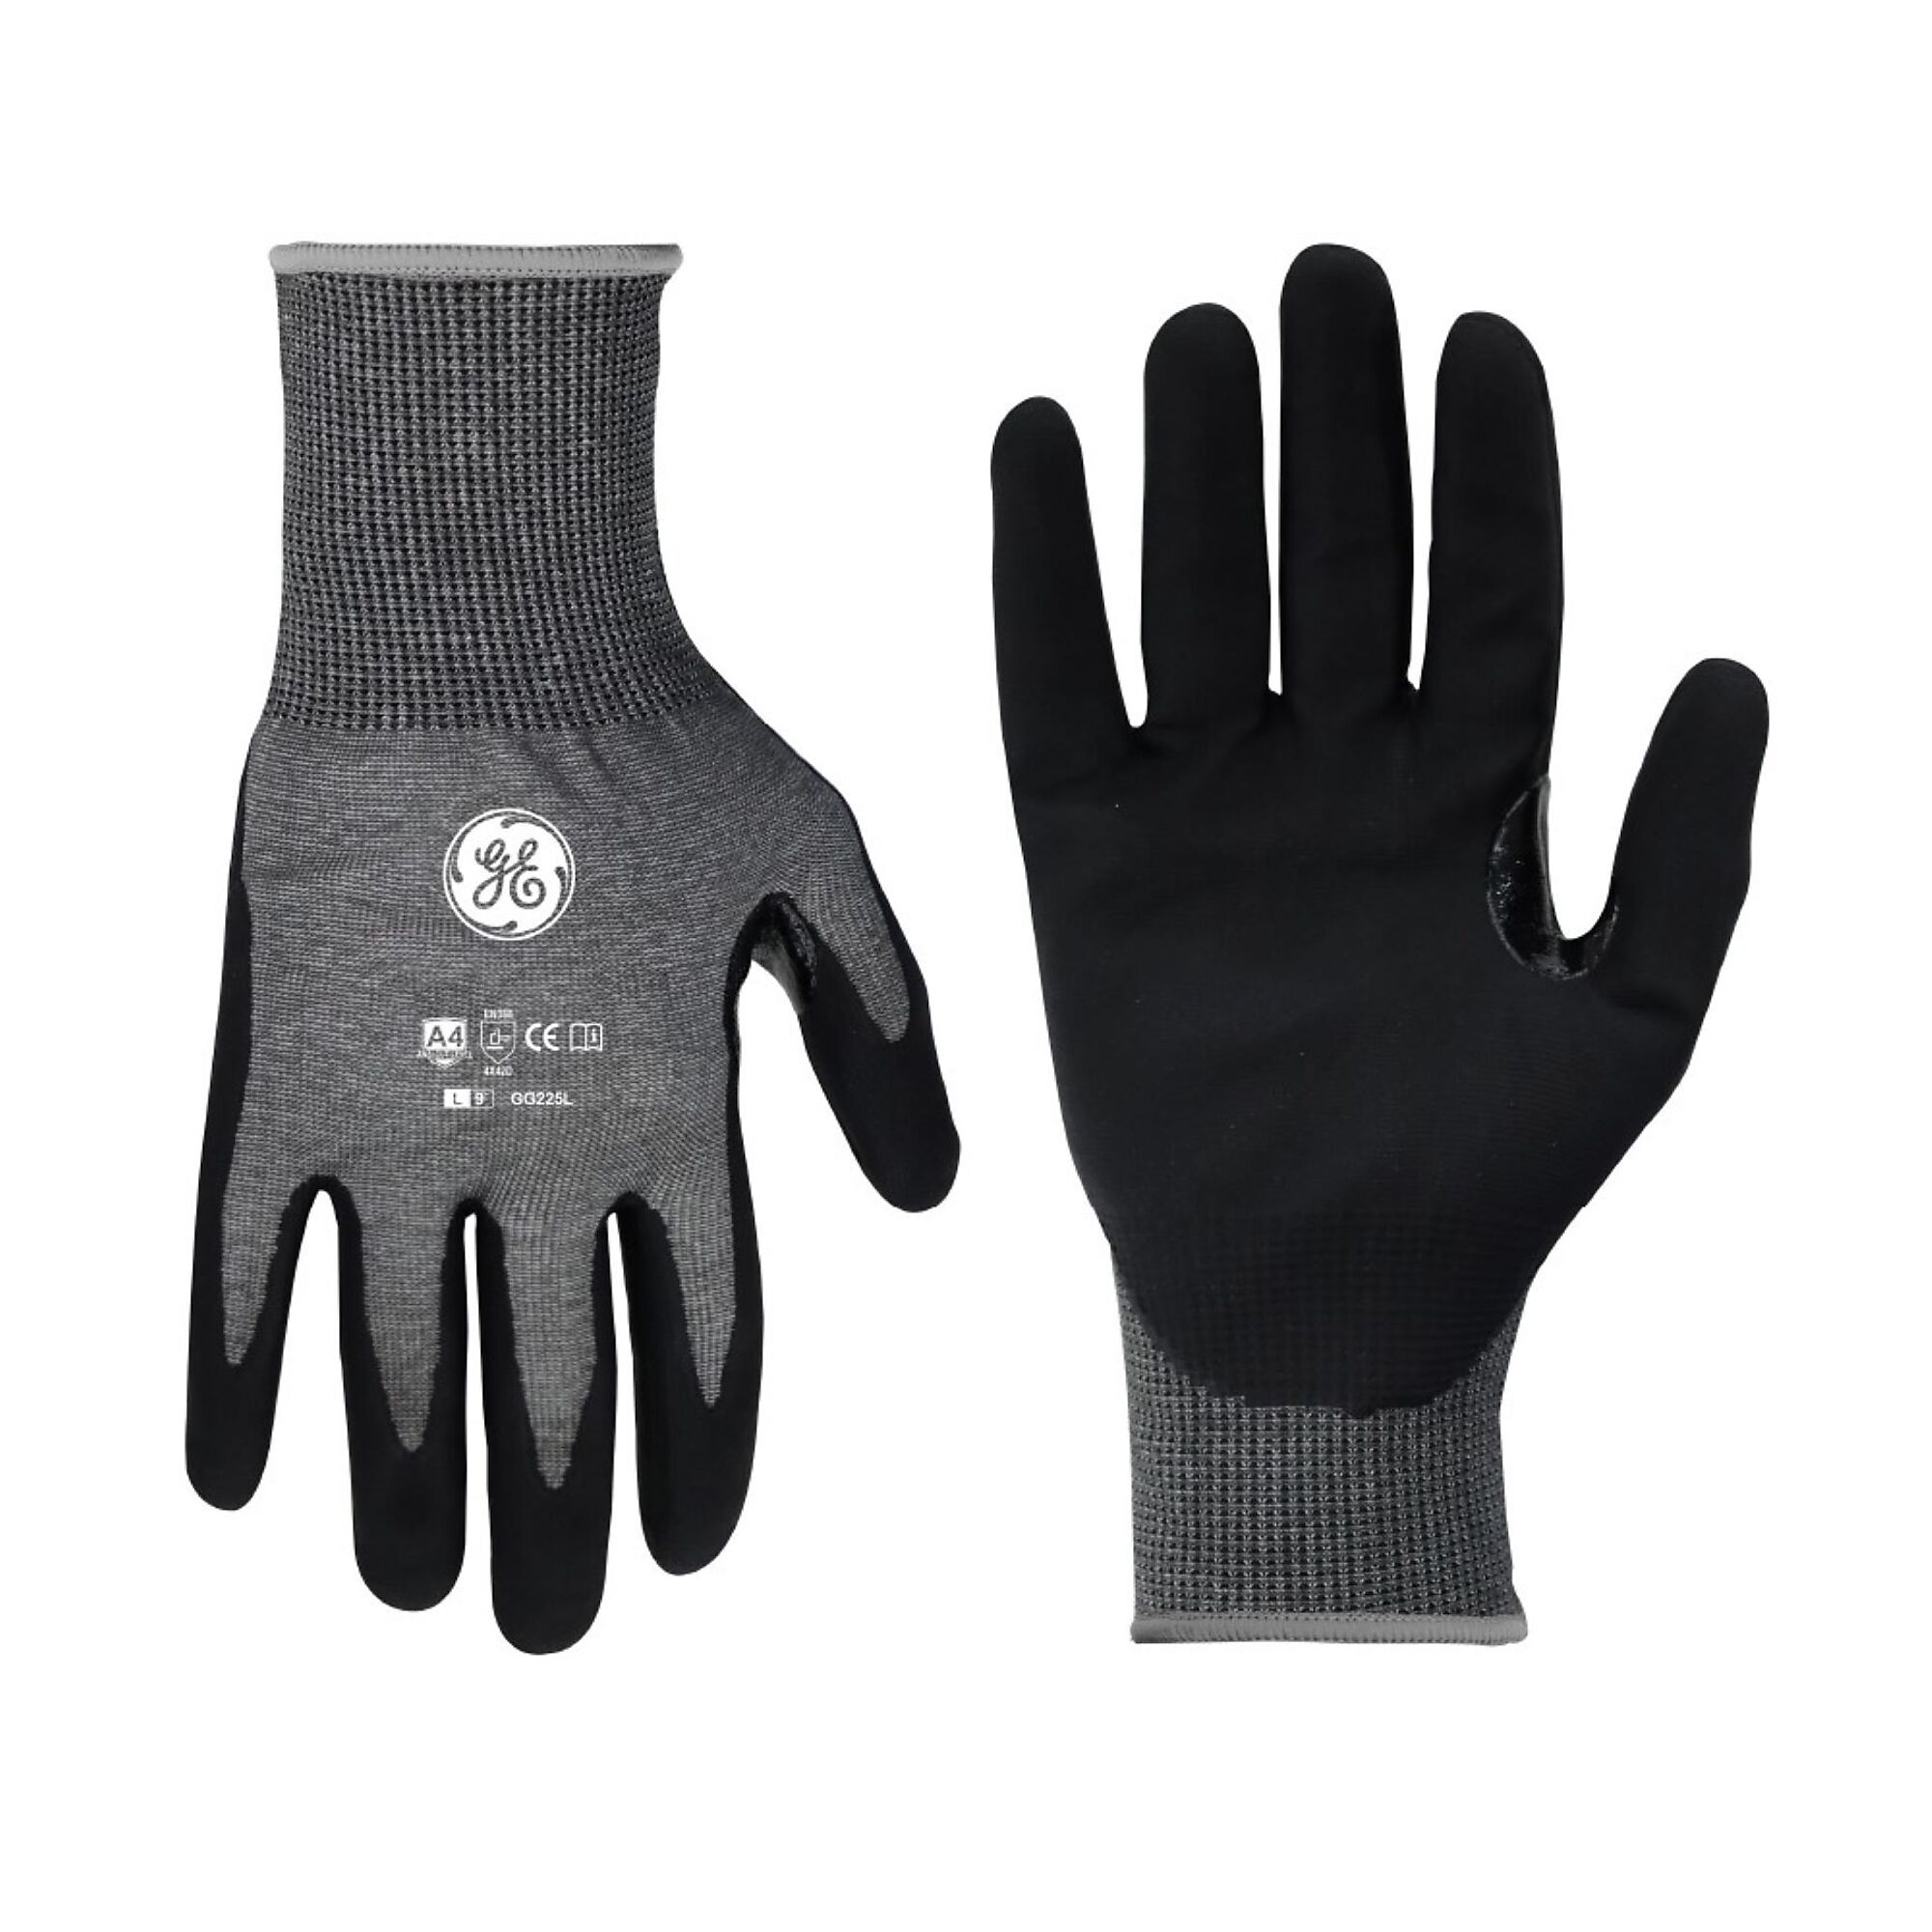 General Electric, Unisex Dipped Gloves Black/Blue L 1 pair, Size L, Included (qty.) 1, Model GG225LC